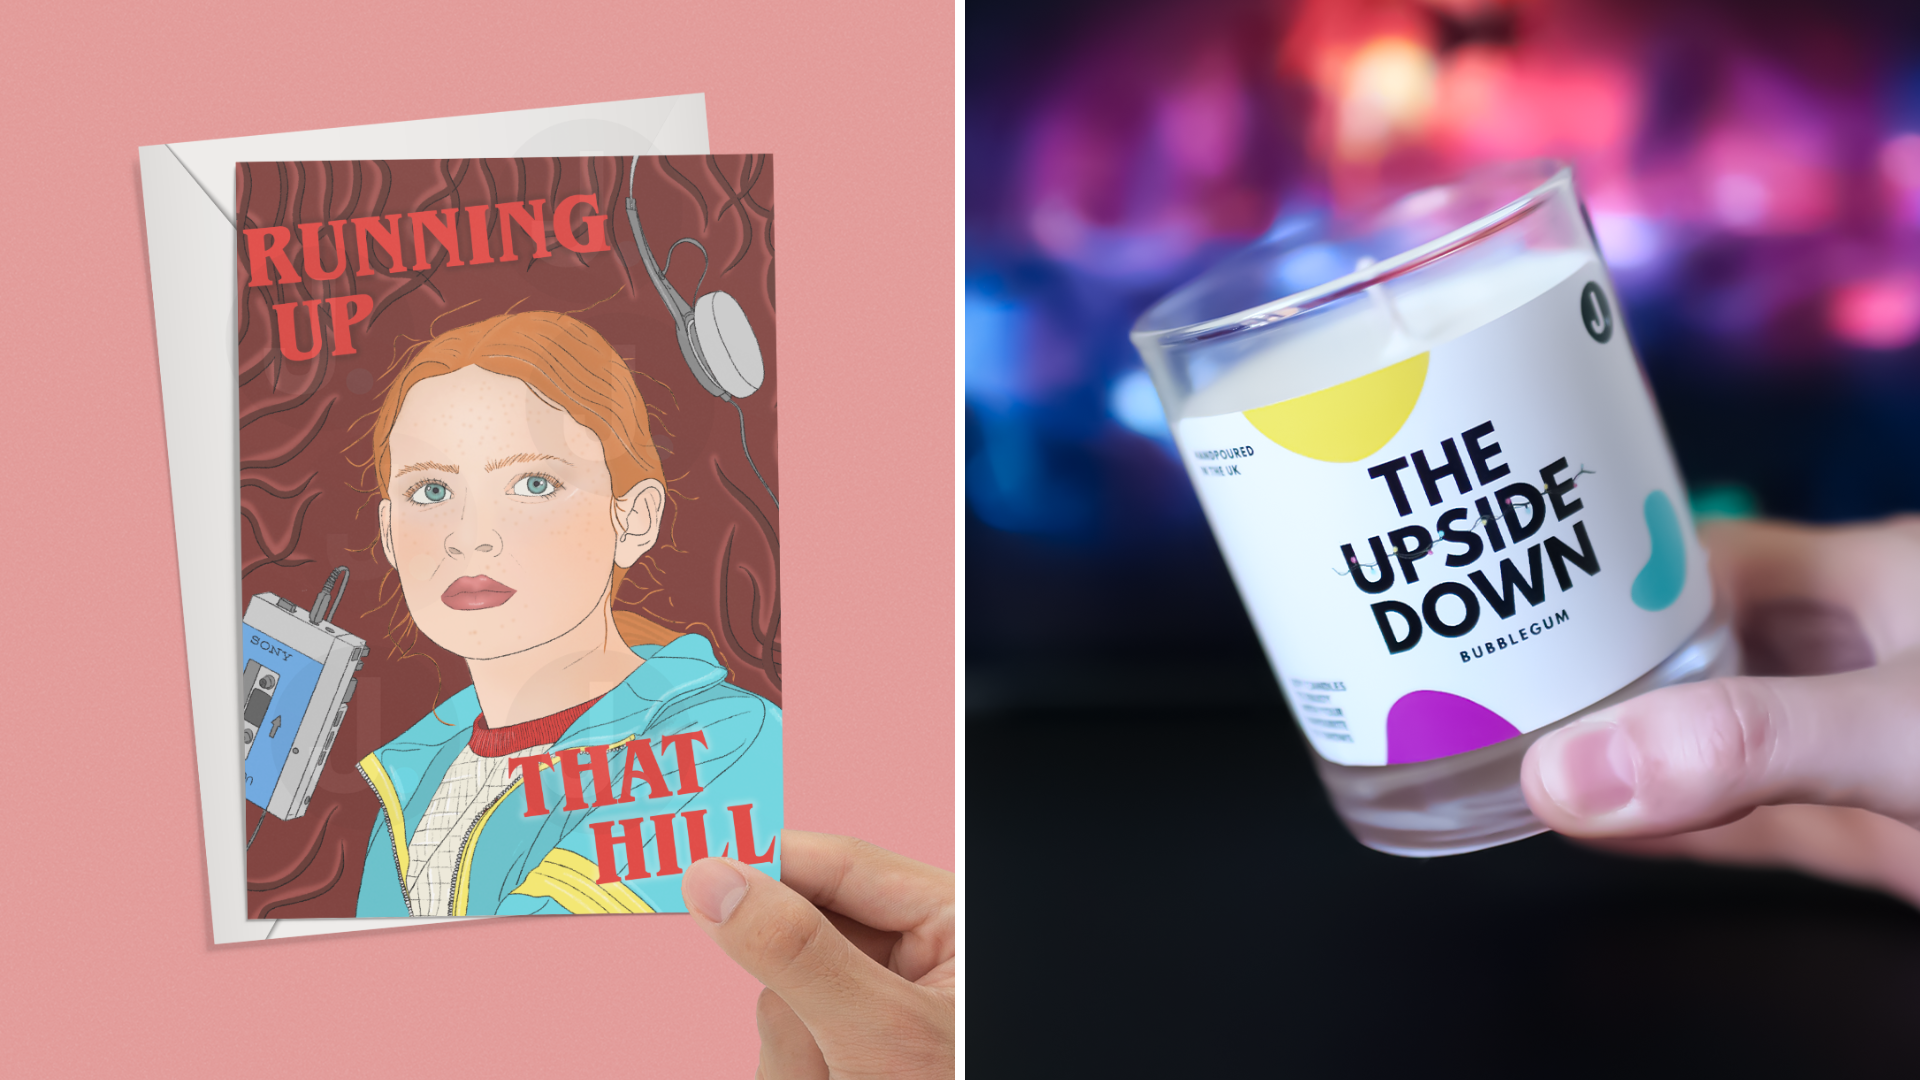 Stranger Things Inspired Gifts For Fans Of The Upside Down - Stranger Things Inspired Gifts